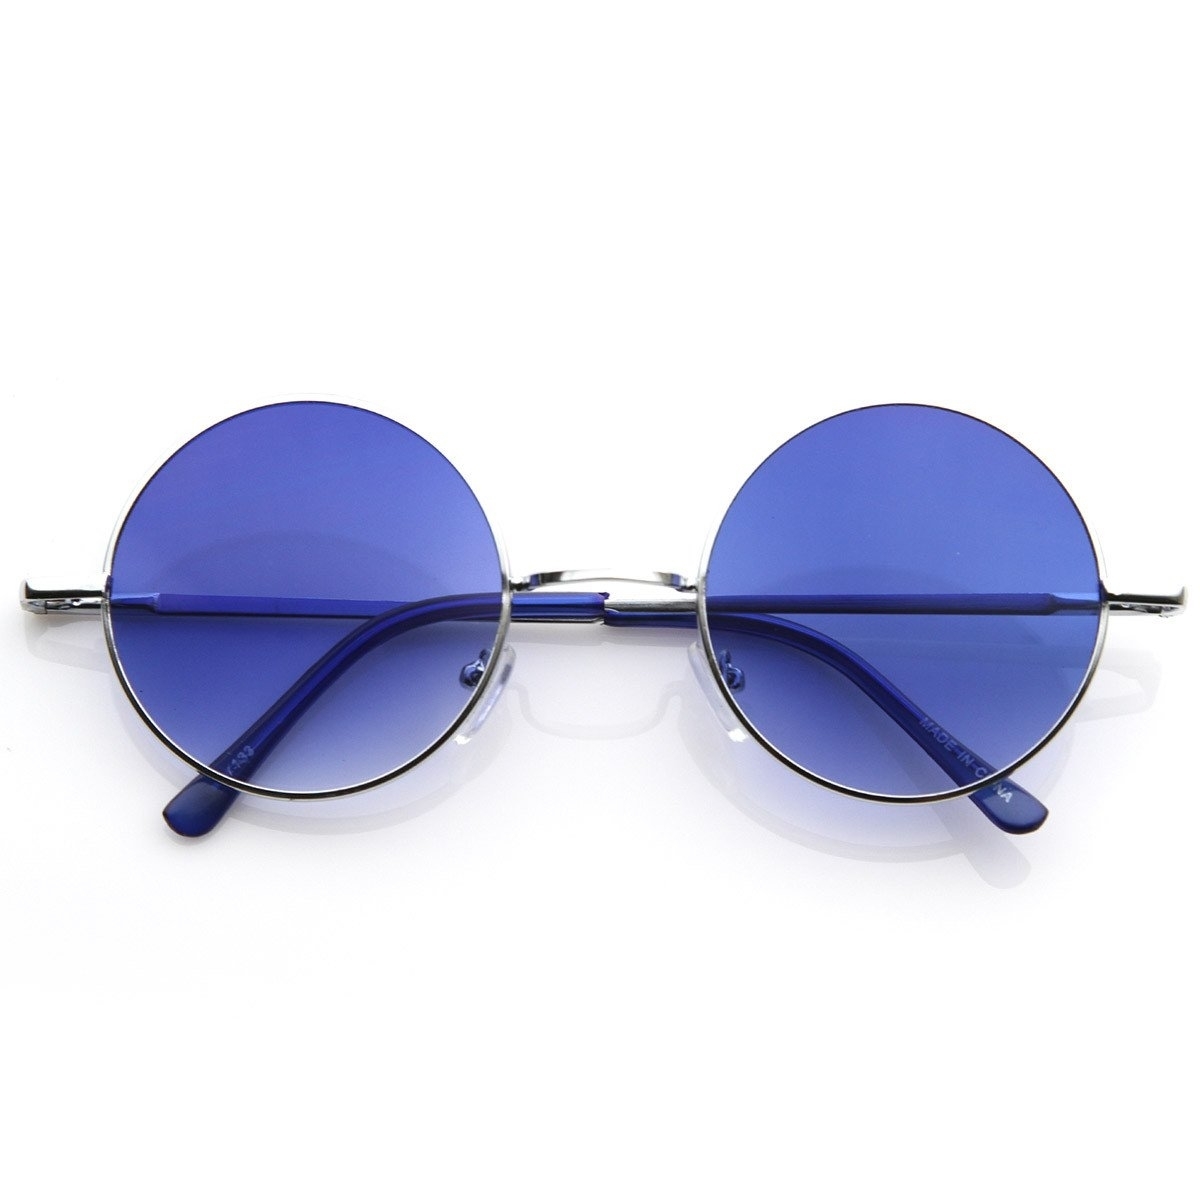 Lennon Style Round Circle Metal Sunglasses W/ Color Lens Tint - Silver Blue